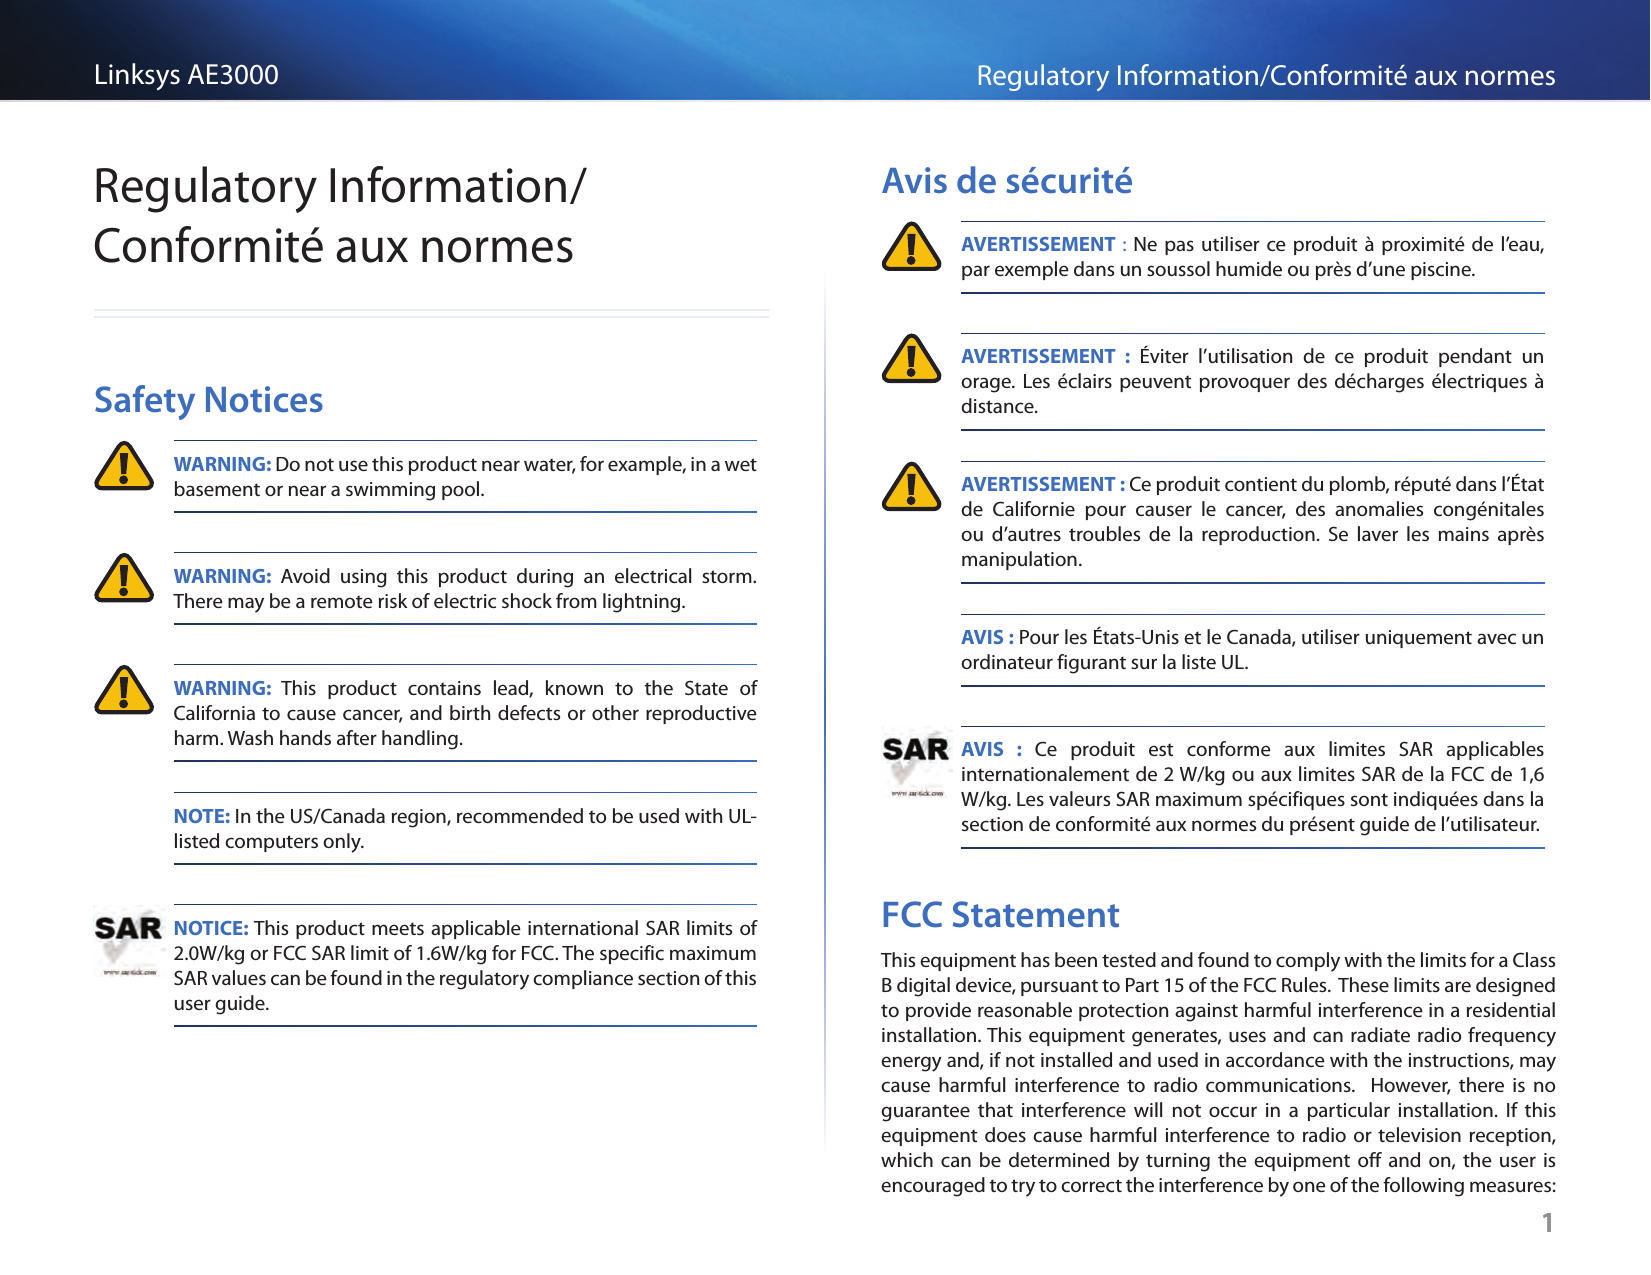 1Regulatory Information/Conformité aux normesLinksys AE30001Regulatory Information/Conformité aux normesSafety Notices WARNING: Do not use this product near water, for example, in a wet basement or near a swimming pool. WARNING: Avoid using this product during an electrical storm. There may be a remote risk of electric shock from lightning. WARNING: This product contains lead, known to the State of California to cause cancer, and birth defects or other reproductive harm. Wash hands after handling. NOTE: In the US/Canada region, recommended to be used with UL-listed computers only. NOTICE: This product meets applicable international SAR limits of 2.0W/kg or FCC SAR limit of 1.6W/kg for FCC. The specific maximum SAR values can be found in the regulatory compliance section of this user guide.Avis de sécurité AVERTISSEMENT : Ne pas utiliser ce produit à proximité de l’eau, par exemple dans un soussol humide ou près d’une piscine. AVERTISSEMENT : Éviter l’utilisation de ce produit pendant un orage. Les éclairs peuvent provoquer des décharges électriques à distance. AVERTISSEMENT : Ce produit contient du plomb, réputé dans l’État de Californie pour causer le cancer, des anomalies congénitales ou d’autres troubles de la reproduction. Se laver les mains après manipulation. AVIS : Pour les États-Unis et le Canada, utiliser uniquement avec un ordinateur figurant sur la liste UL. AVIS : Ce produit est conforme aux limites SAR applicables internationalement de 2 W/kg ou aux limites SAR de la FCC de 1,6 W/kg. Les valeurs SAR maximum spécifiques sont indiquées dans la section de conformité aux normes du présent guide de l’utilisateur.FCC StatementThis equipment has been tested and found to comply with the limits for a Class B digital device, pursuant to Part 15 of the FCC Rules.  These limits are designed to provide reasonable protection against harmful interference in a residential installation. This equipment generates, uses and can radiate radio frequency energy and, if not installed and used in accordance with the instructions, may cause harmful interference to radio communications.  However, there is no guarantee that interference will not occur in a particular installation. If this equipment does cause harmful interference to radio or television reception, which can be determined by turning the equipment off and on, the user is encouraged to try to correct the interference by one of the following measures: